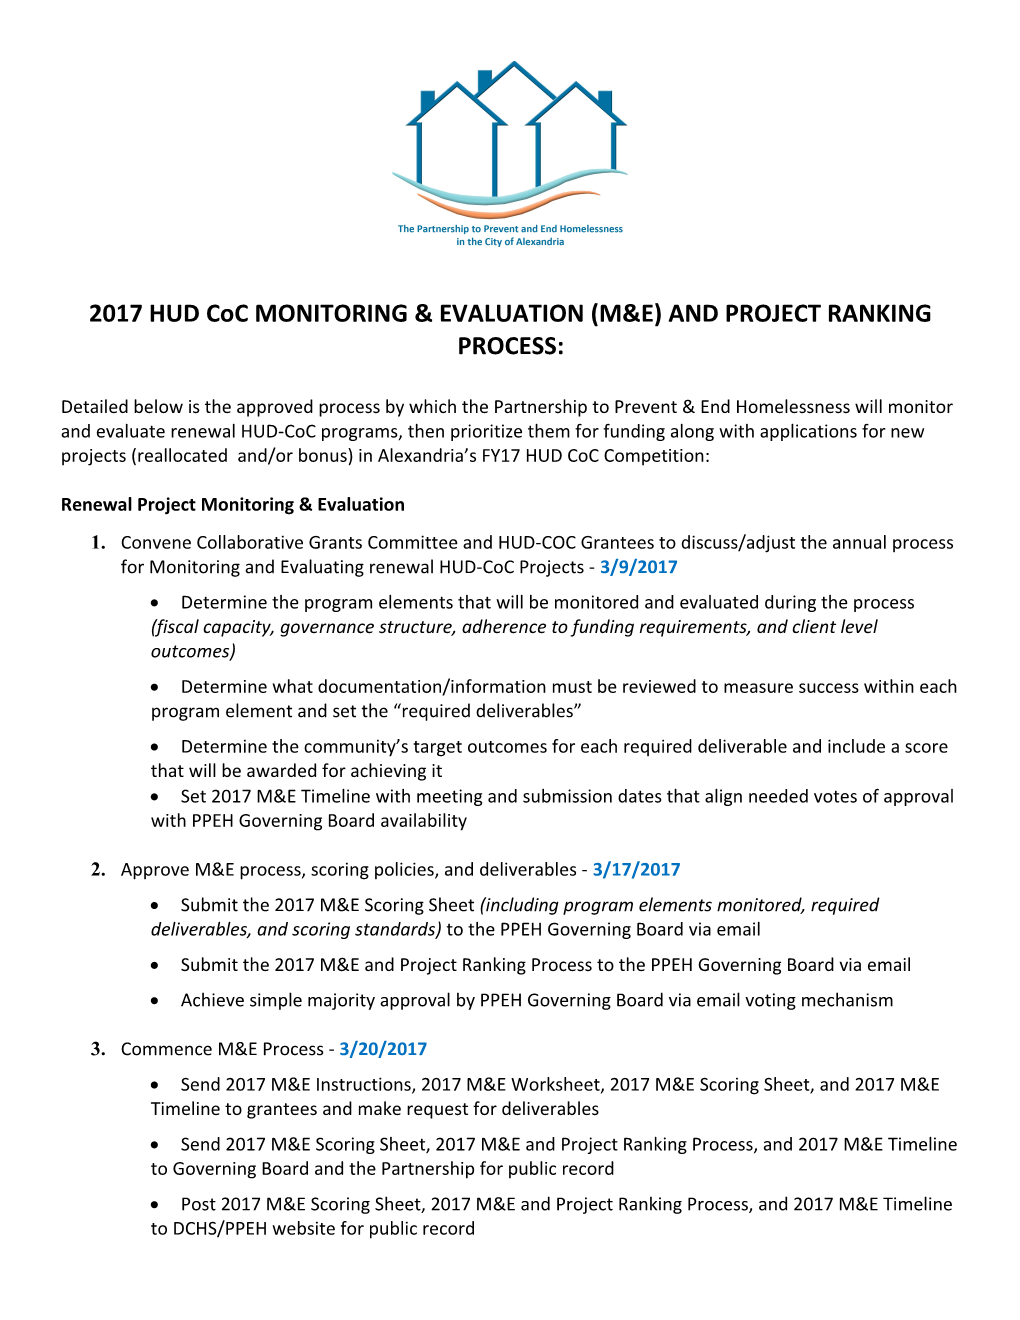 2017HUD Cocmonitoring & EVALUATION (M&E) and PROJECT RANKING PROCESS